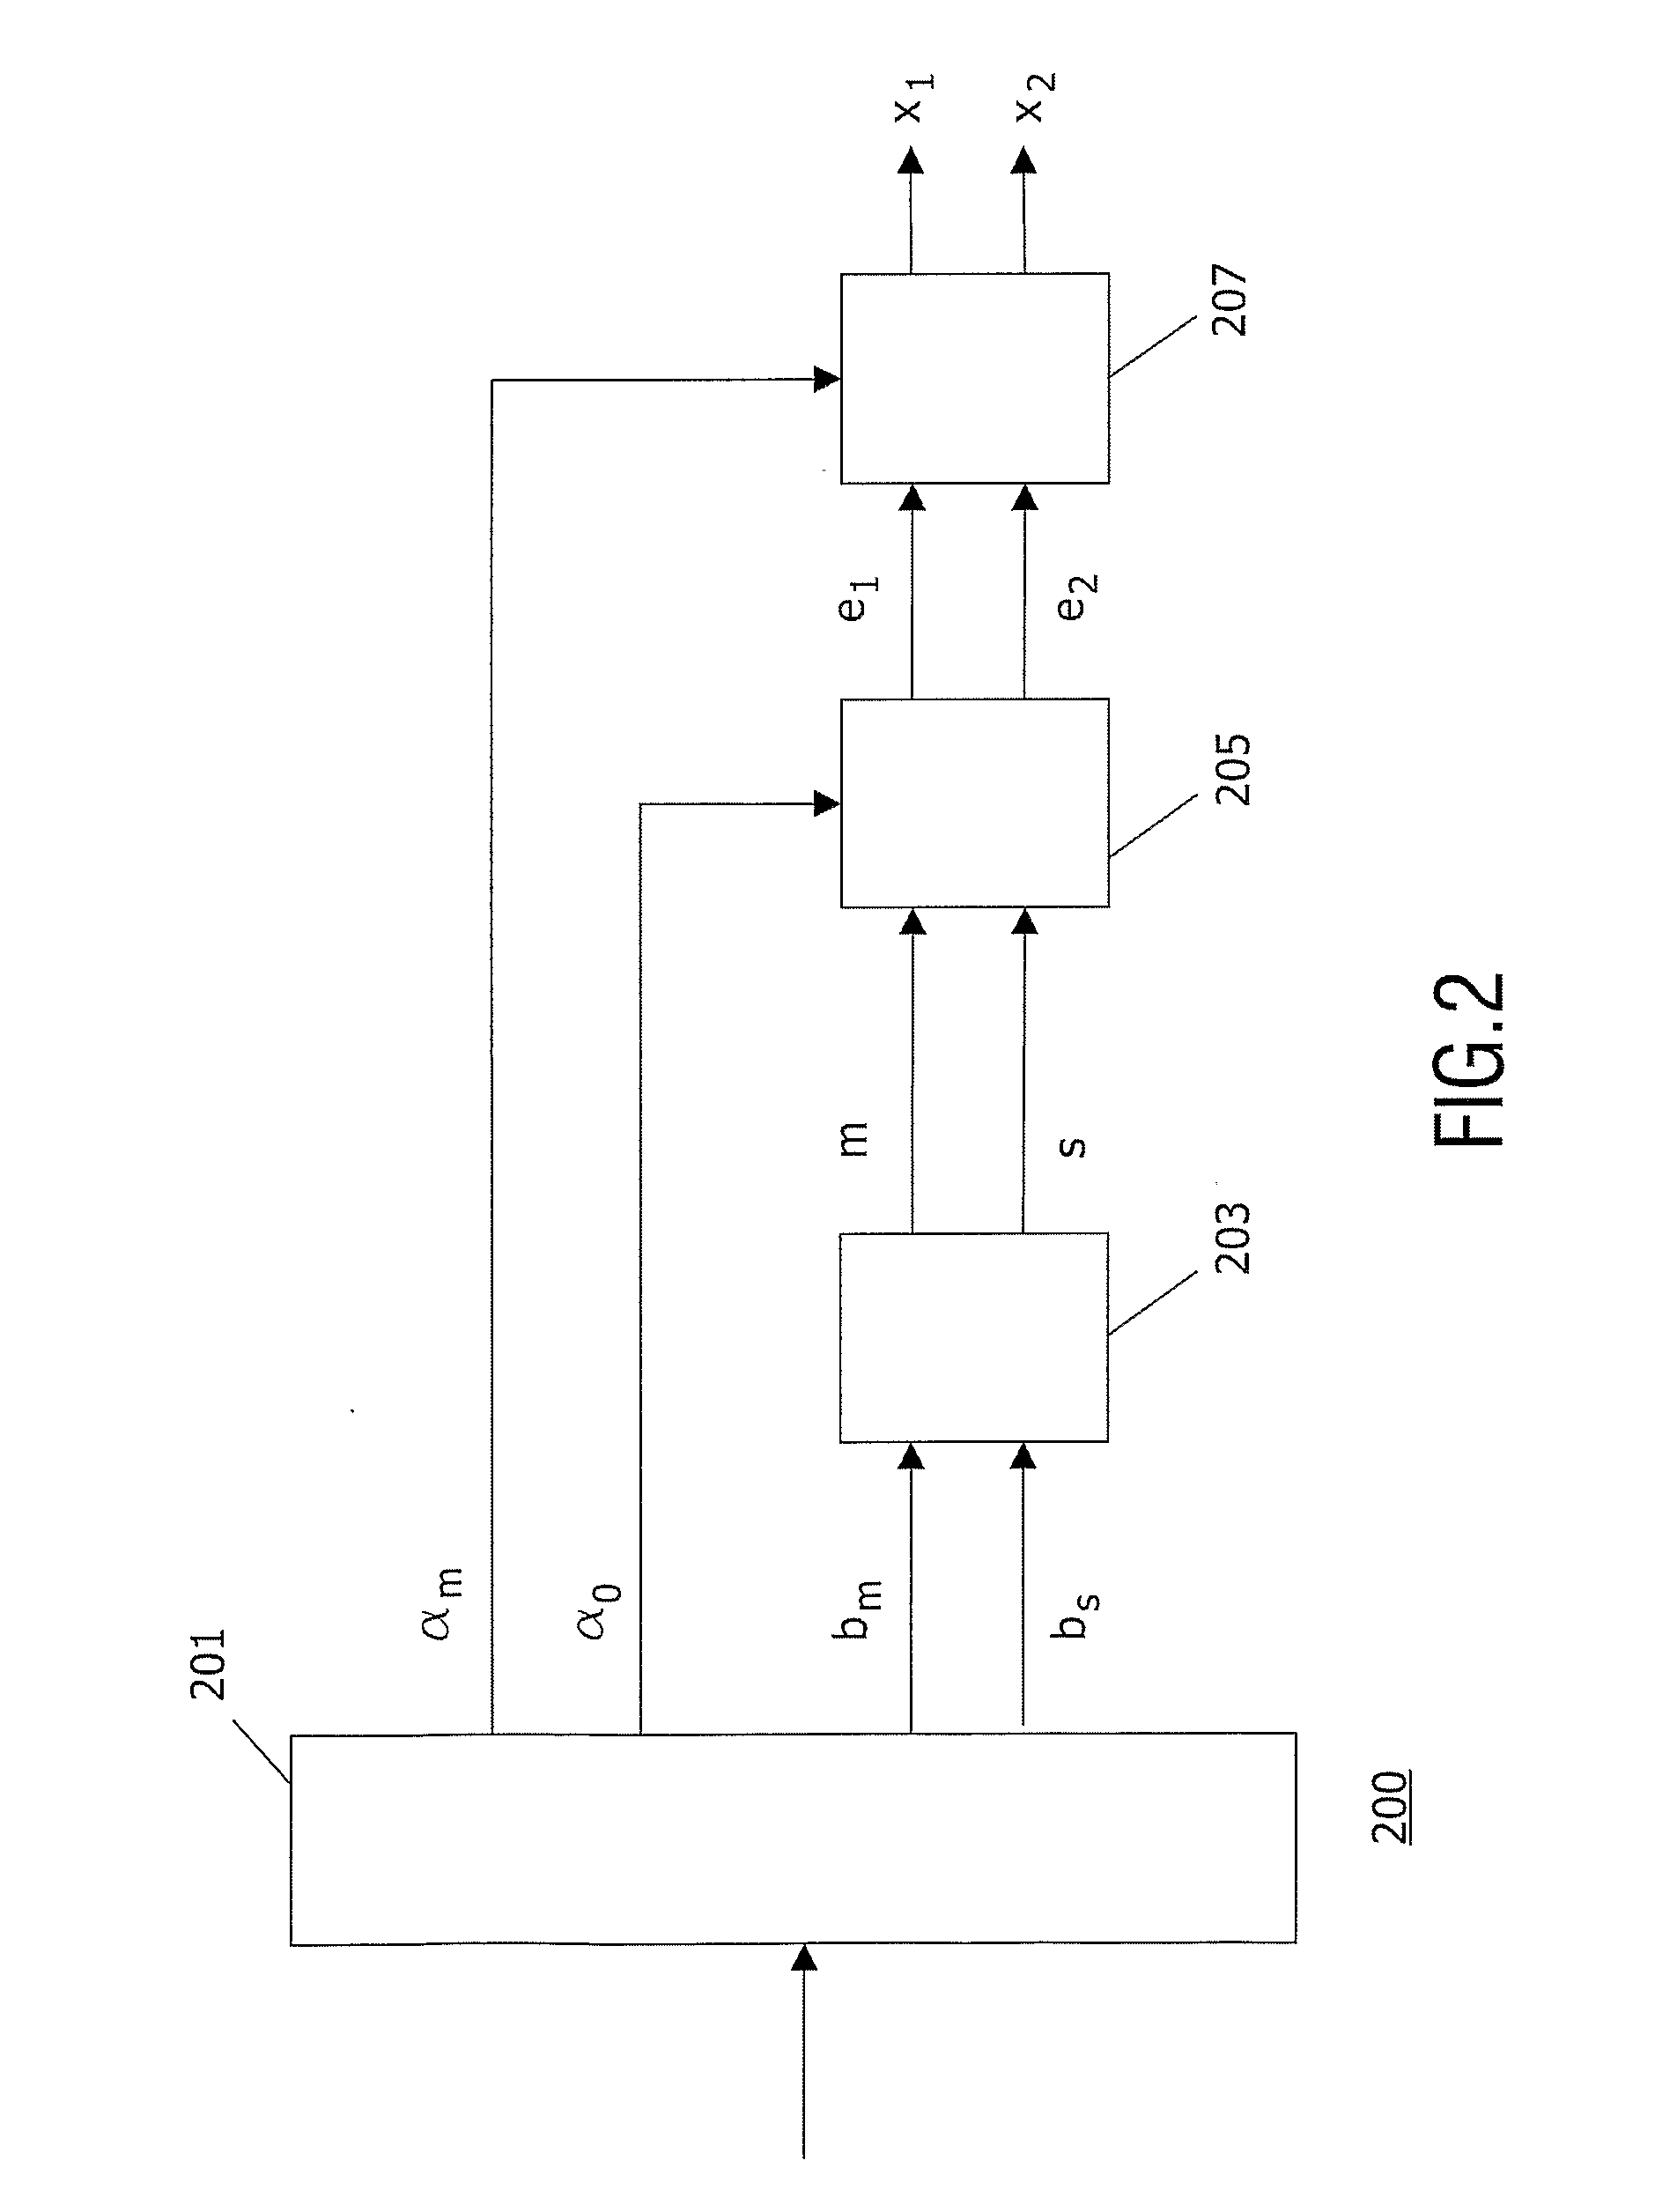 Method and Apparatus to Encode and Decode Multi-Channel Audio Signals